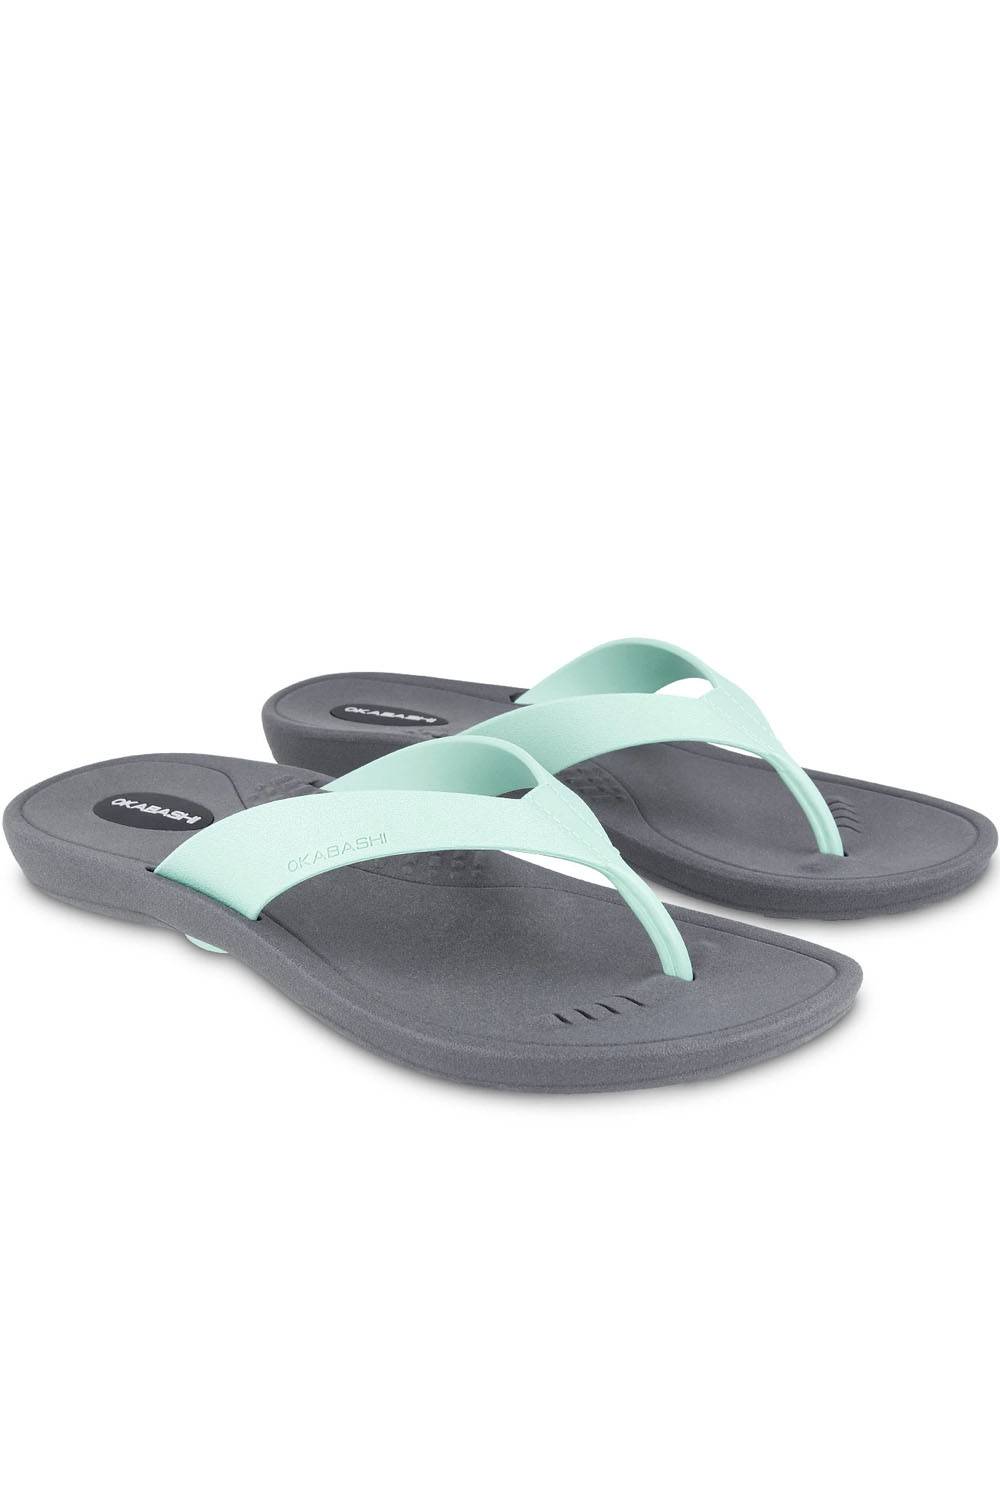 20 Best Affordable And Sustainable Flip Flops You'll Love | Panaprium